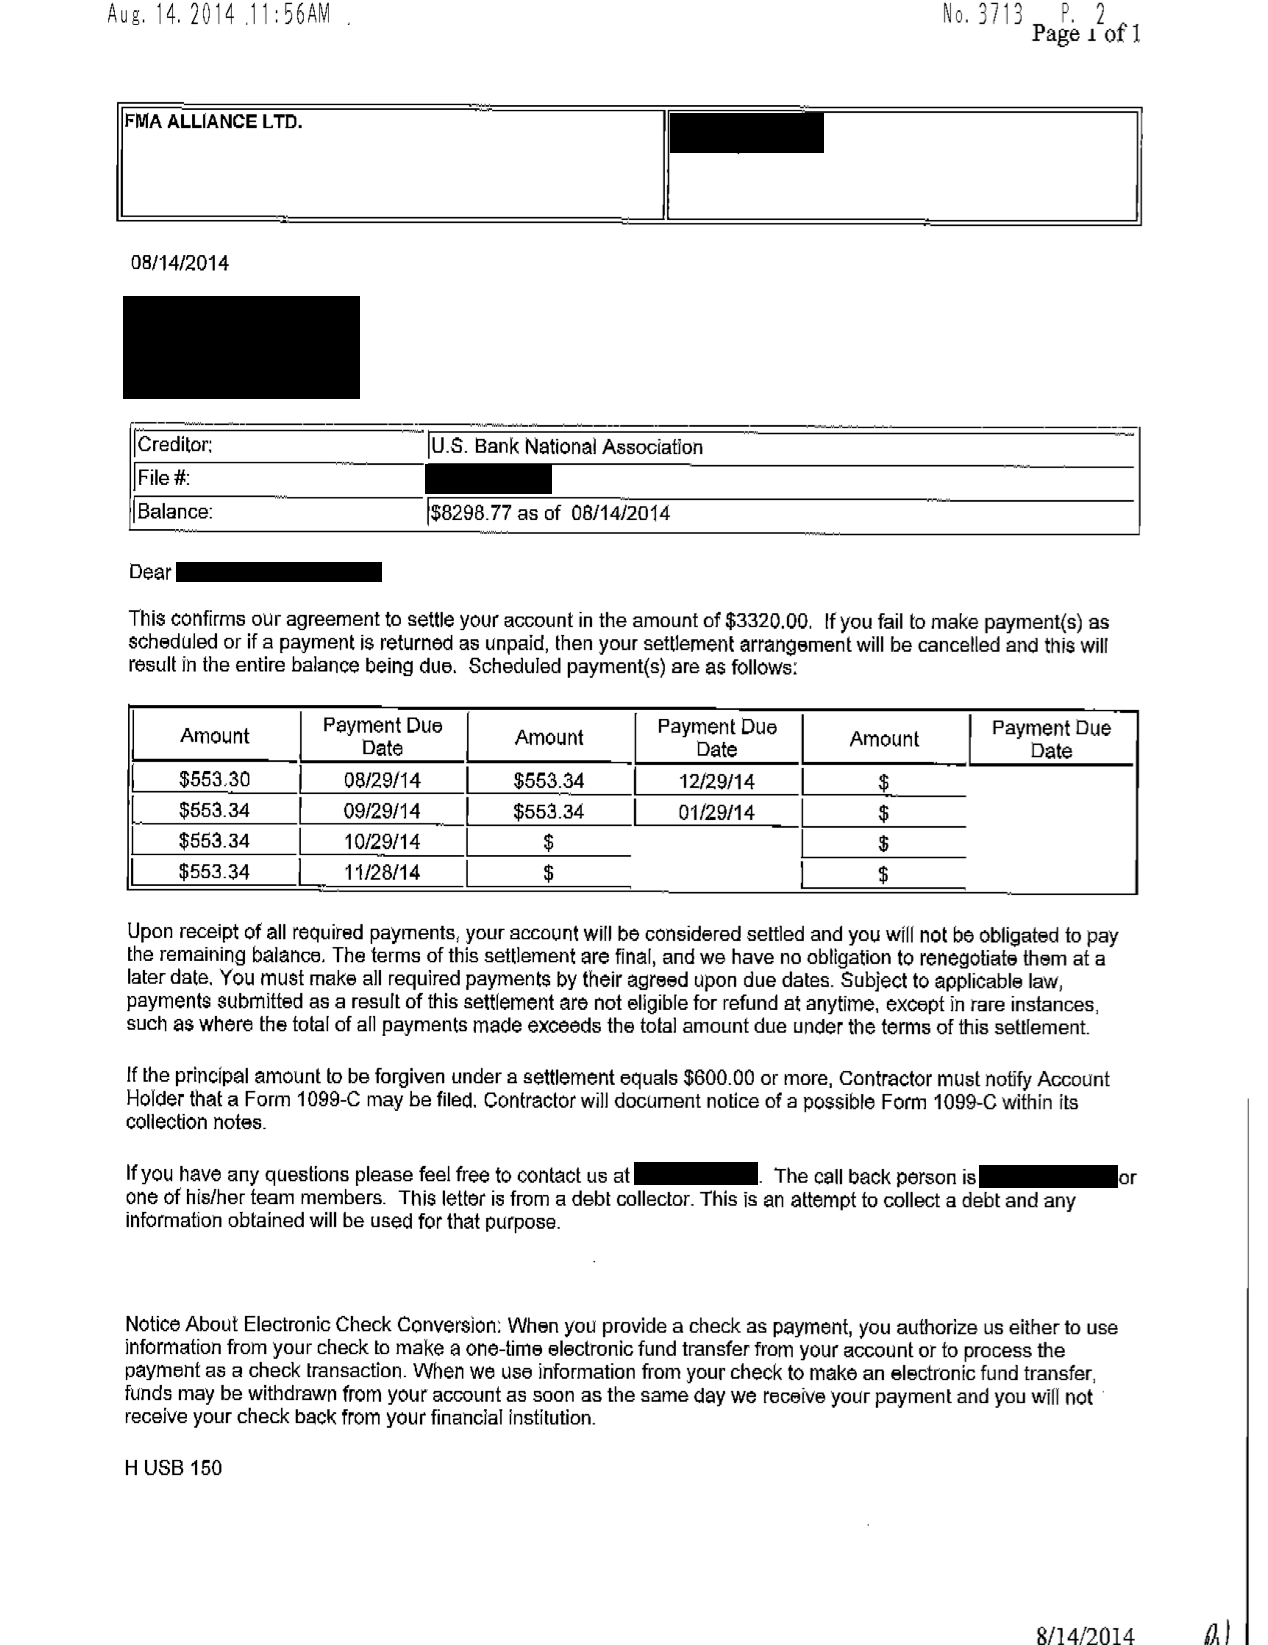 Image of a settlement letter with U.S. Bank National Association with savings of 4,978 dollars